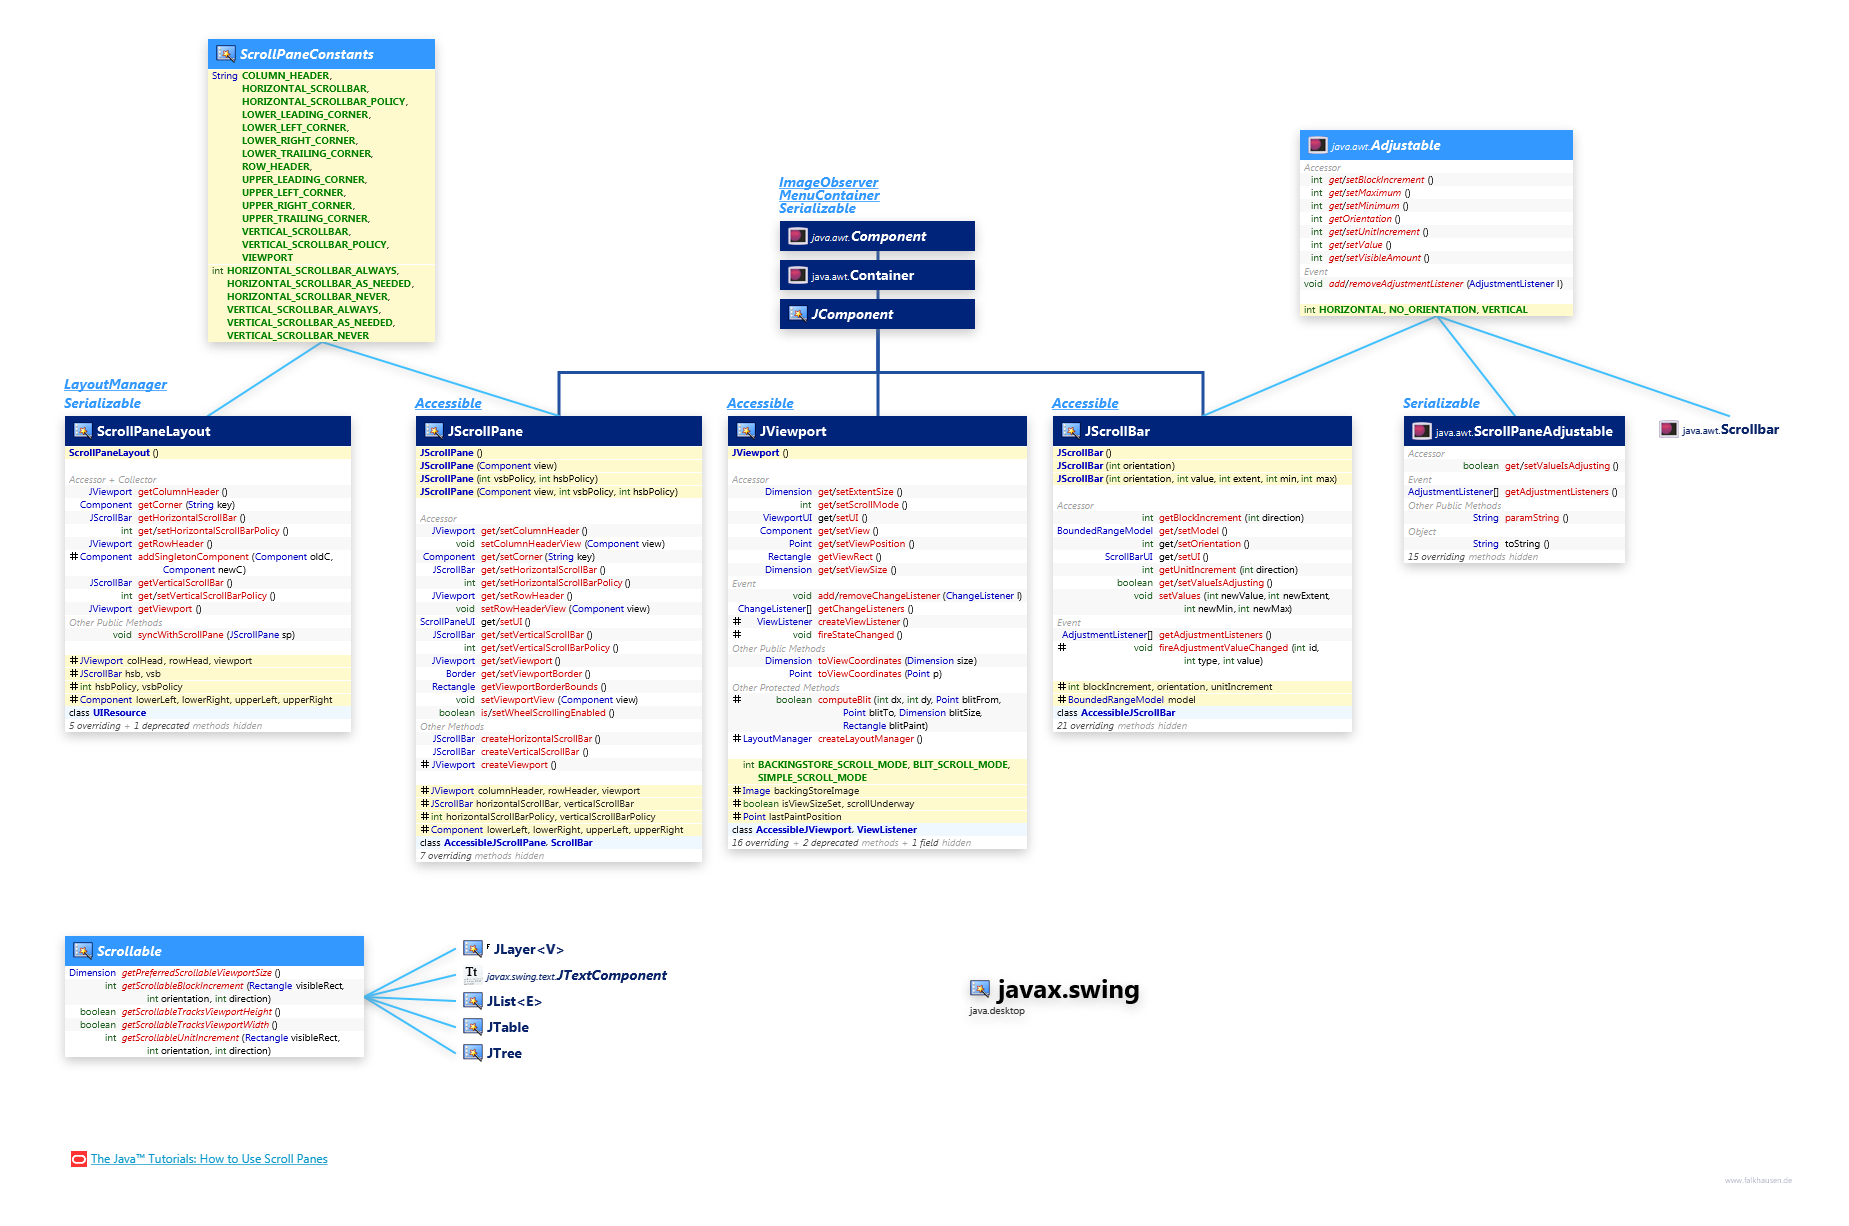 javax.swing Scrolling class diagram and api documentation for Java 10